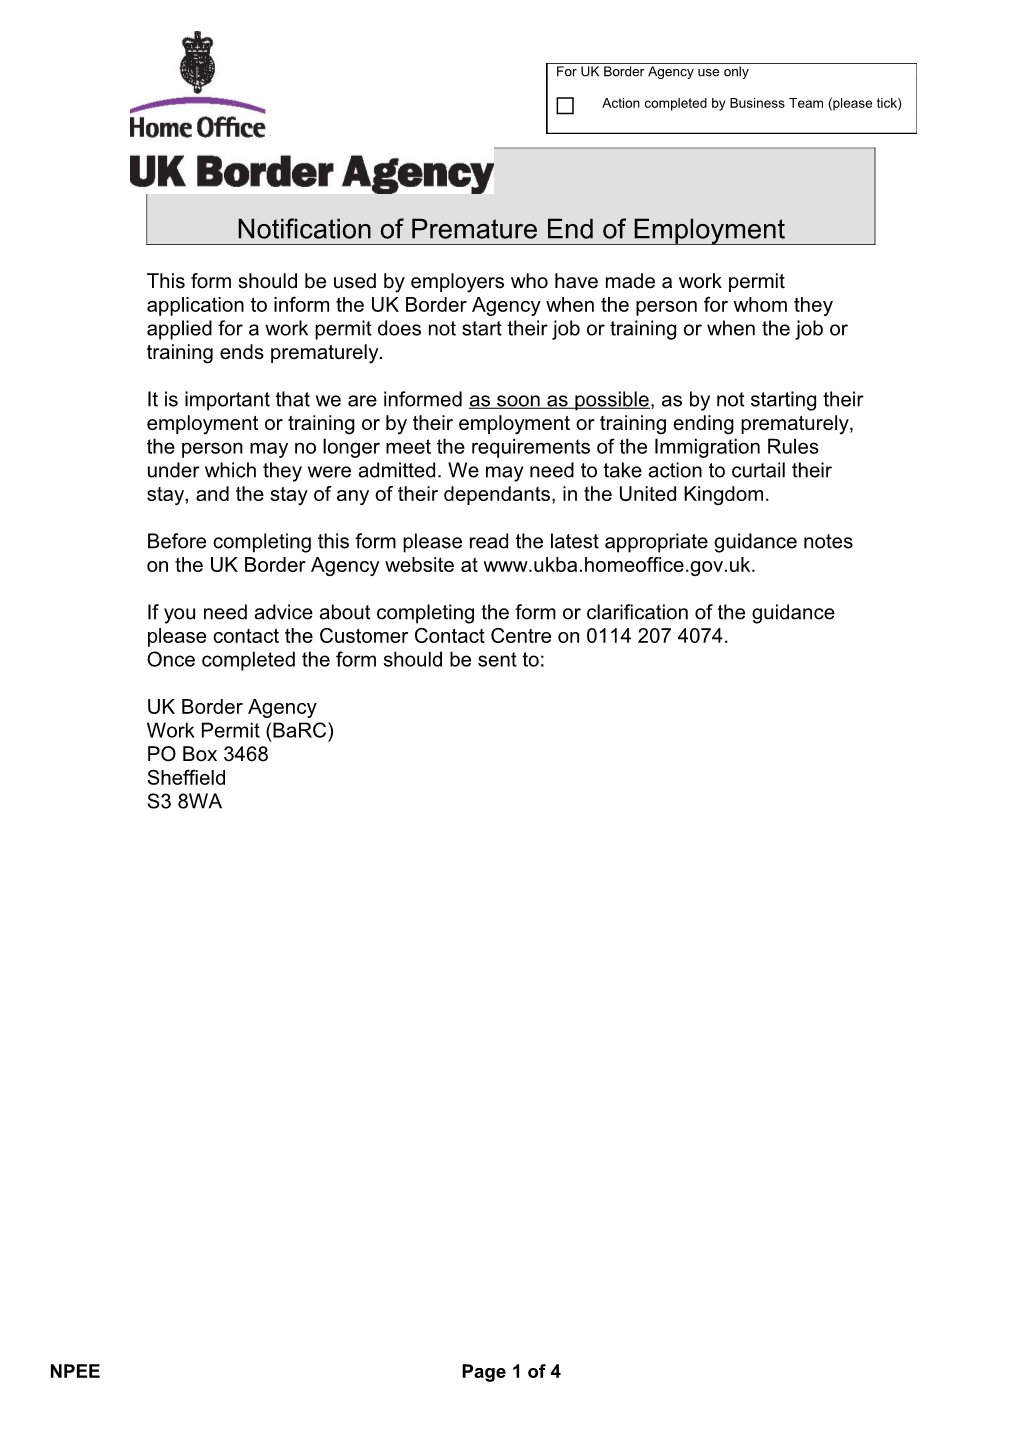 Notification of Premature End of Employment